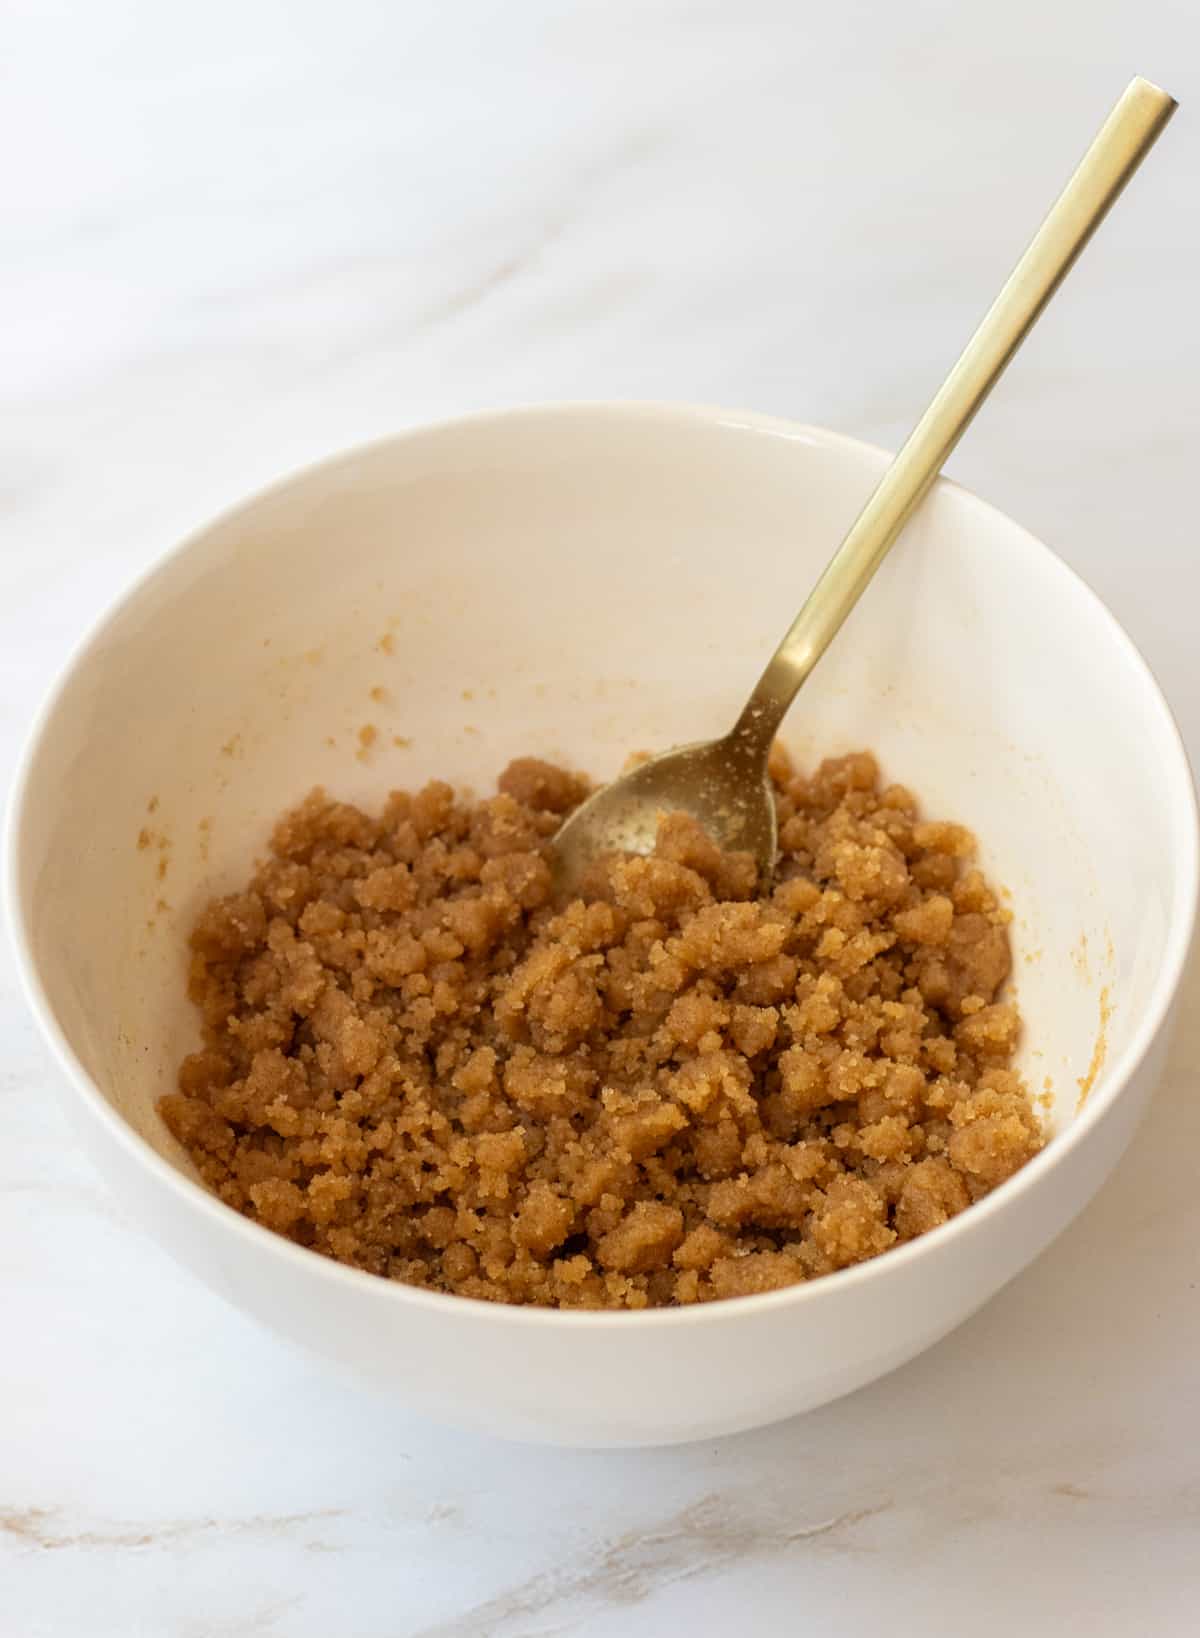 Streusel in a bowl with a spoon.